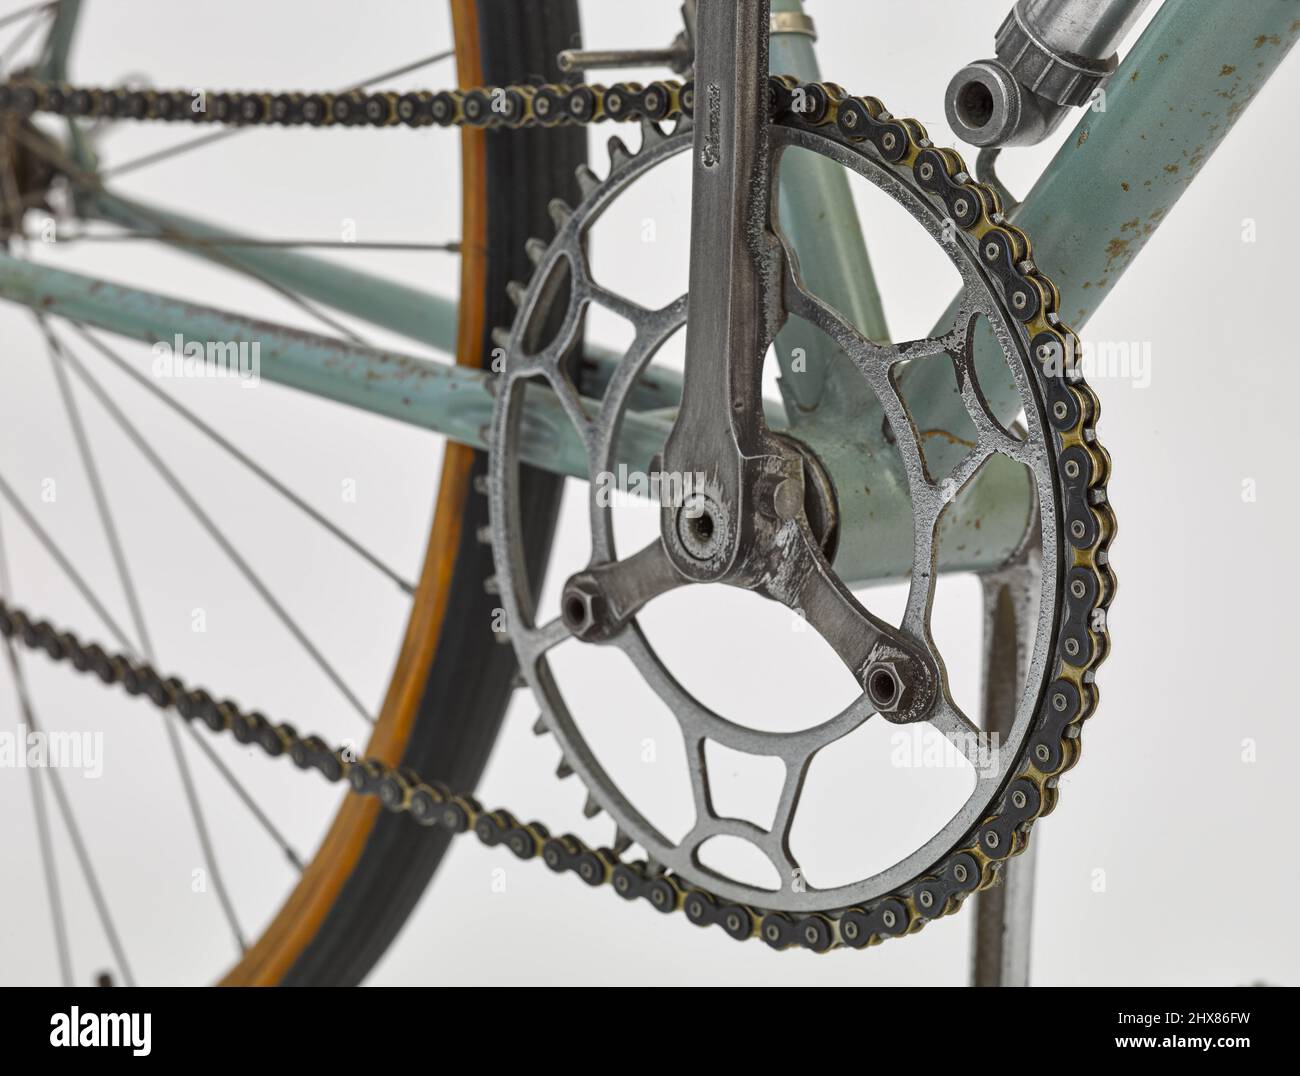 Rennrad Mod. 67 Diamant, Germany, 1939, chainring. 3 useable gears, Steel  frame with aluminium components attached, 27in wooden rims Special  Features: National Racing Team from 1930s Stock Photo - Alamy